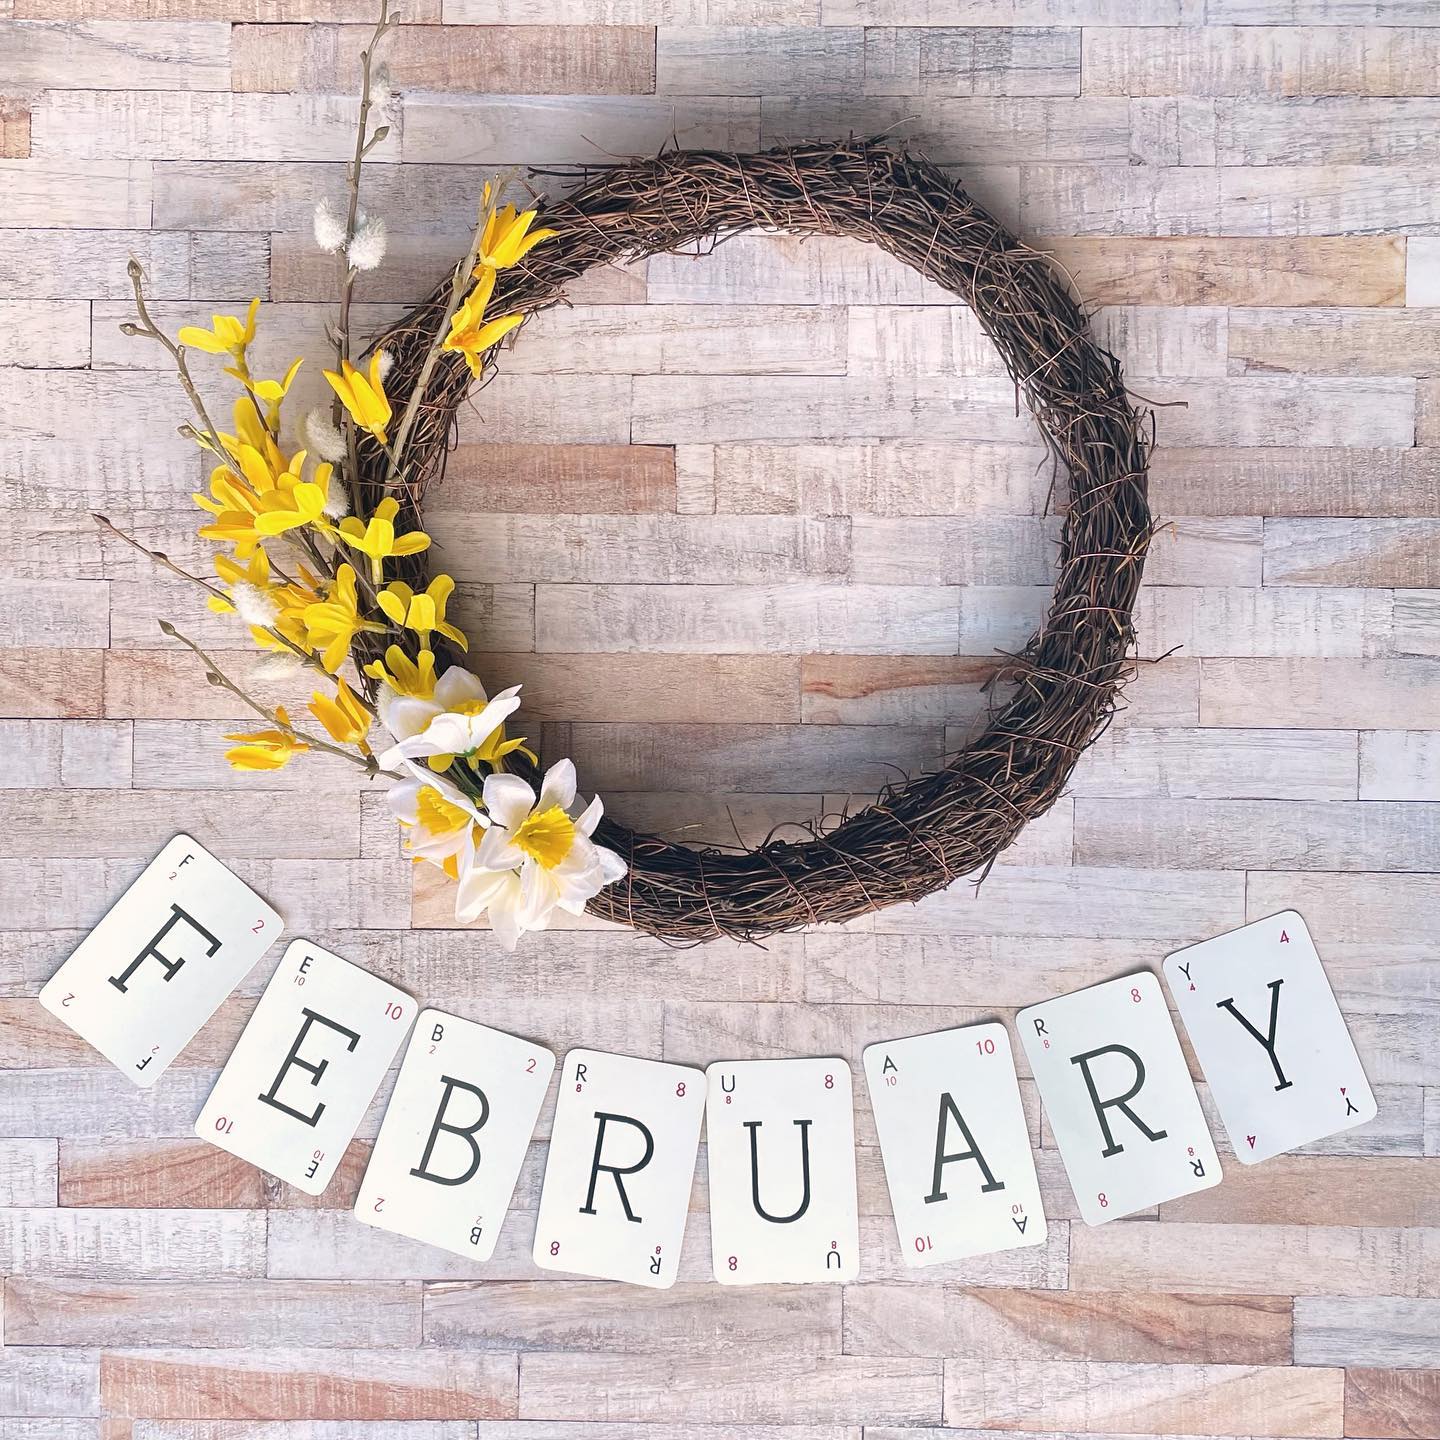 Hello February Flatlay faffing in the shed! New creative opportunities for me this month – can't wait to get started. Also enjoying lighter longer days and signs of new life in the garden. (Spring wreaths for your home from £20, created by me!) What do you love about February?